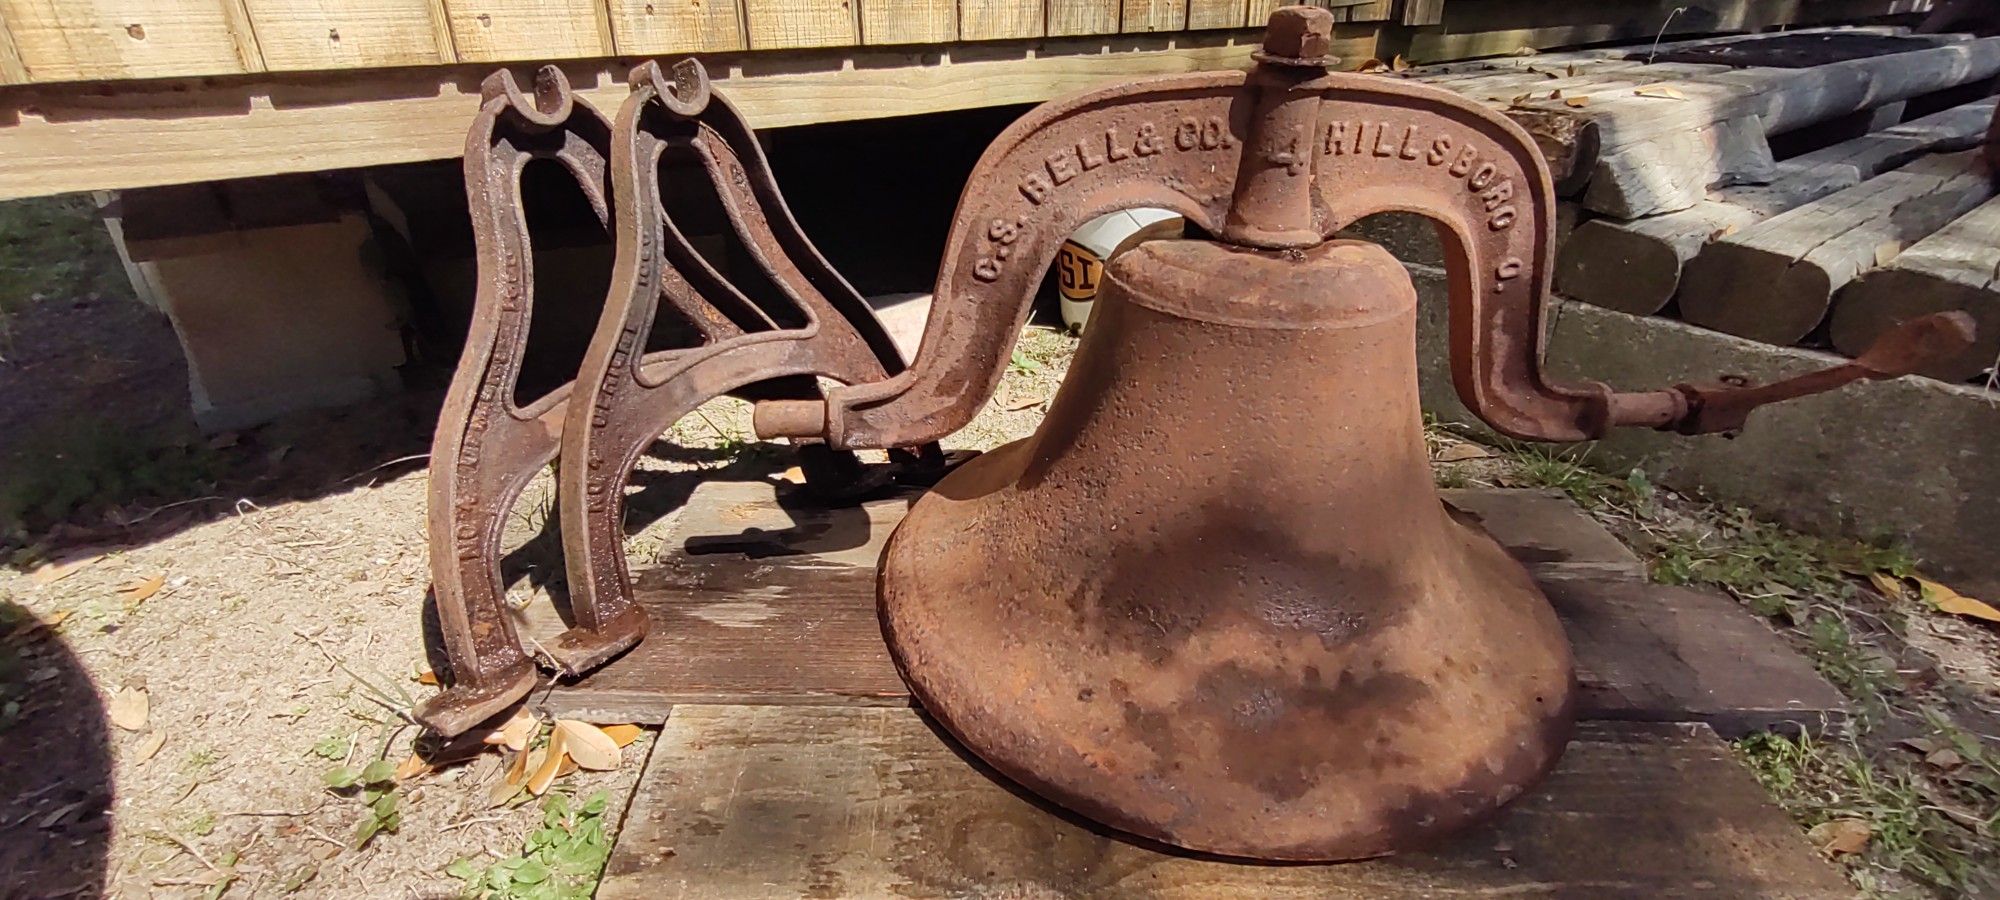 C.S Bell & Sons #4 Bell (HEAVY)